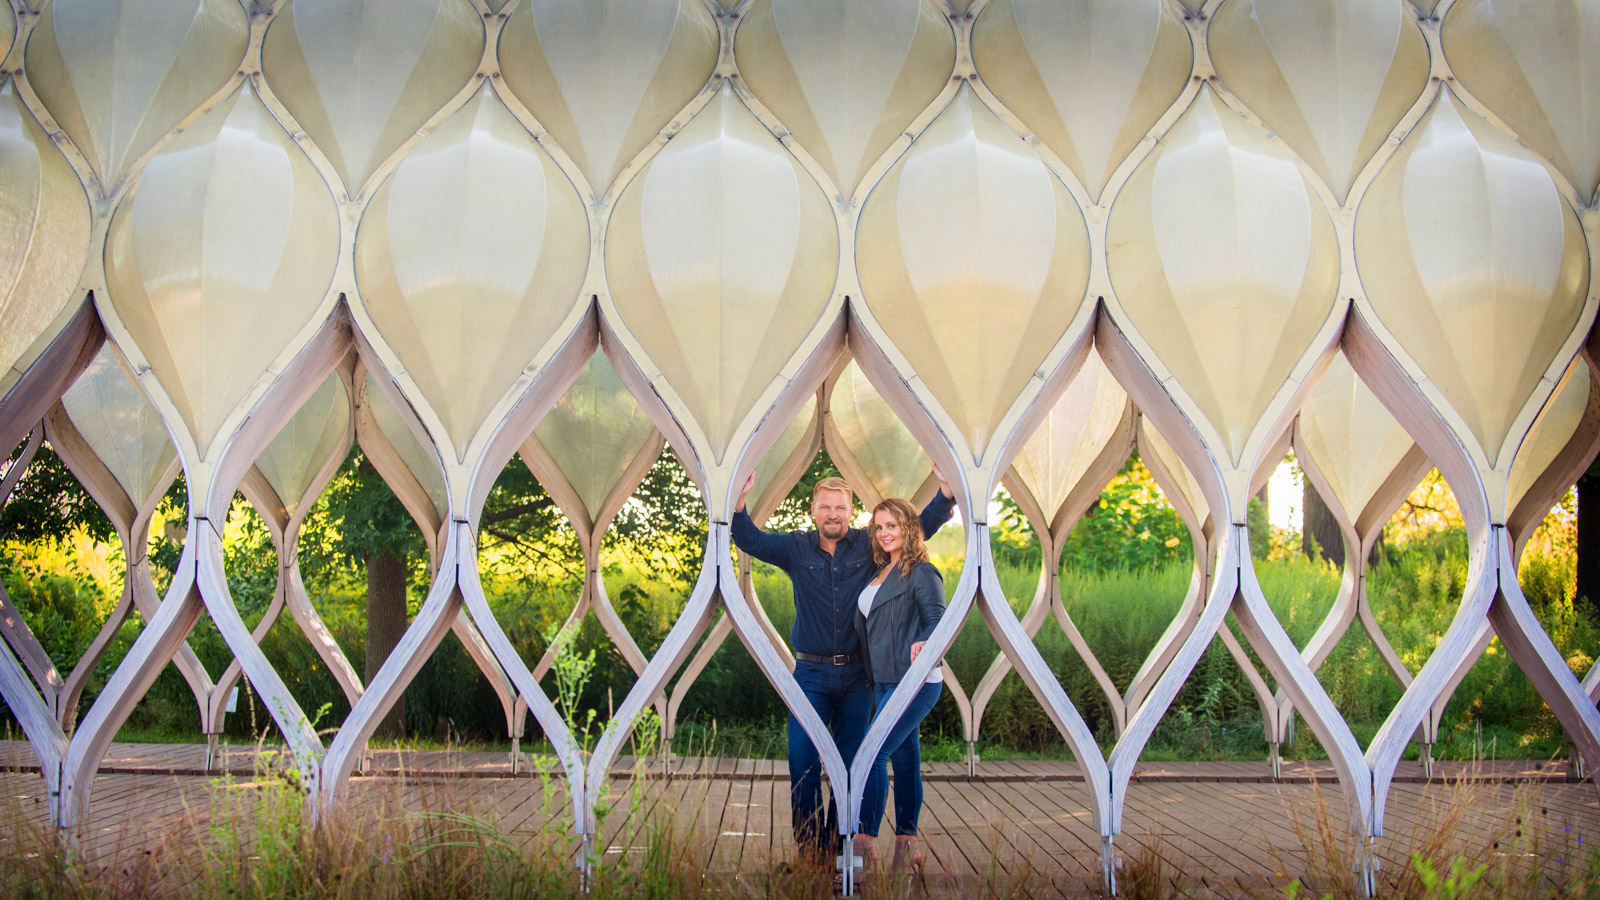 Chicago engagement session in Lincoln Park Zoo's South Pond inside the honeycomb structure called the People’s Gas Education Pavilion